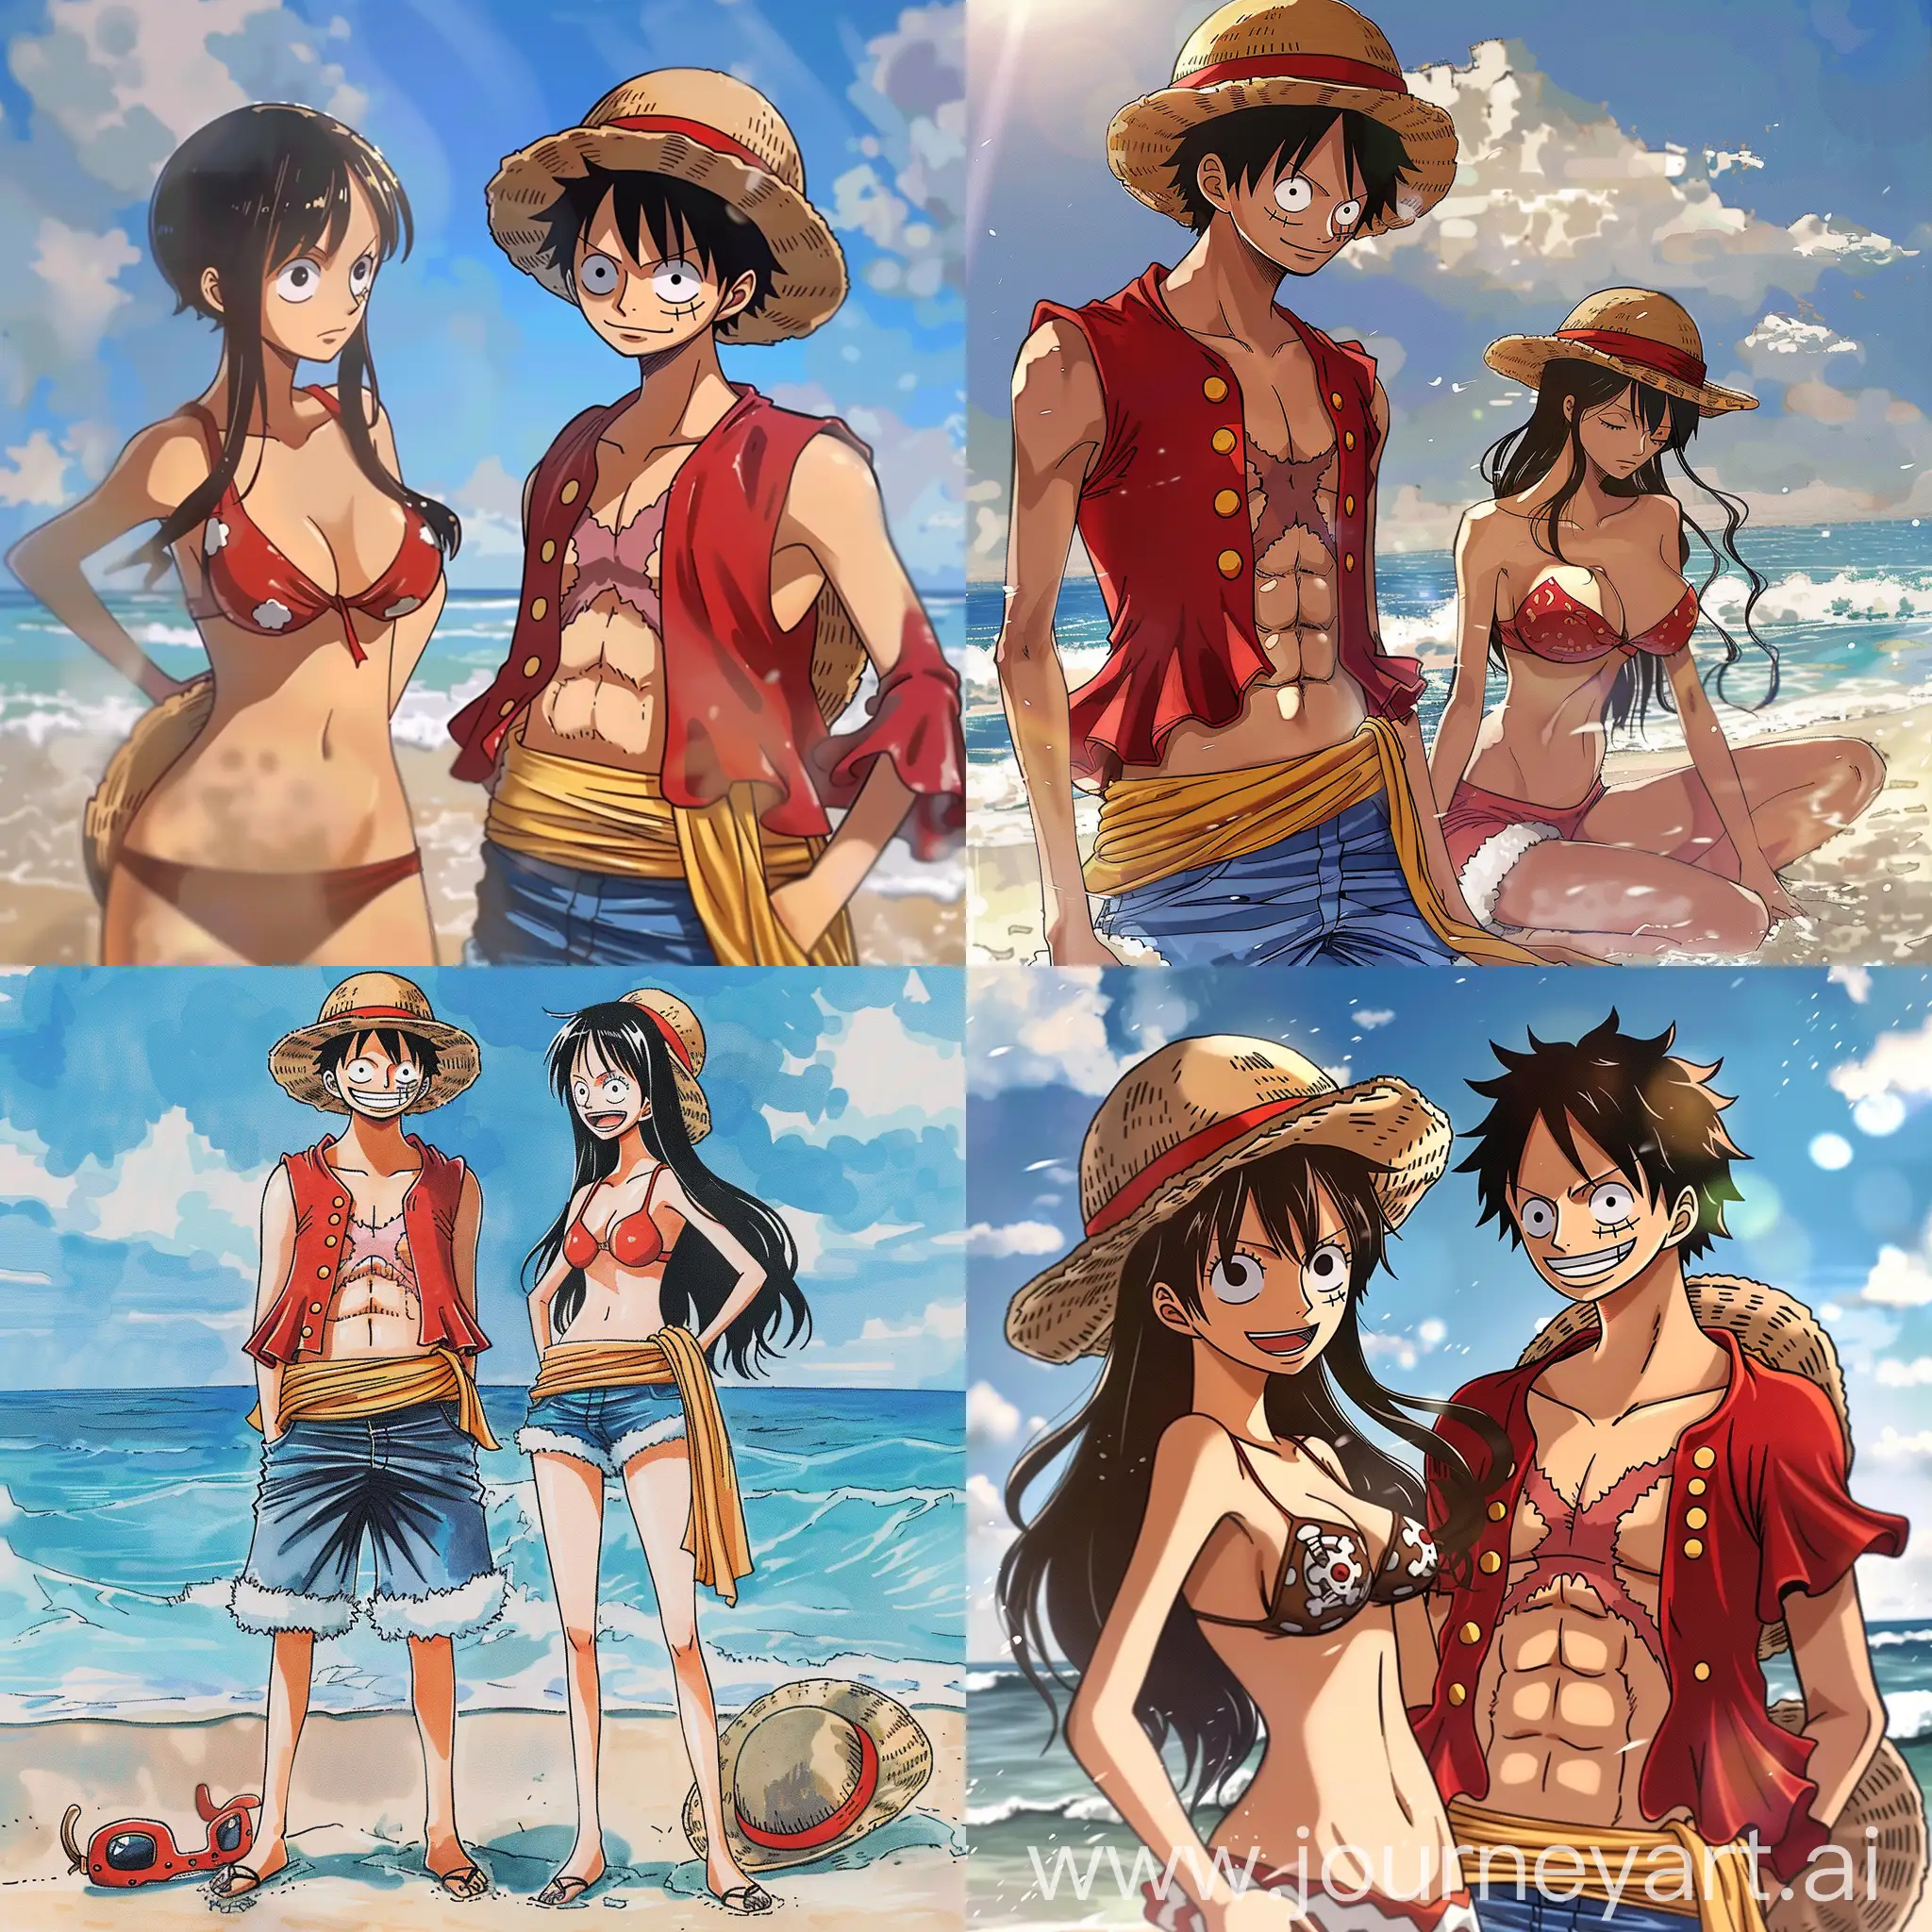 Luffy one piece as a girl with yamato in beach